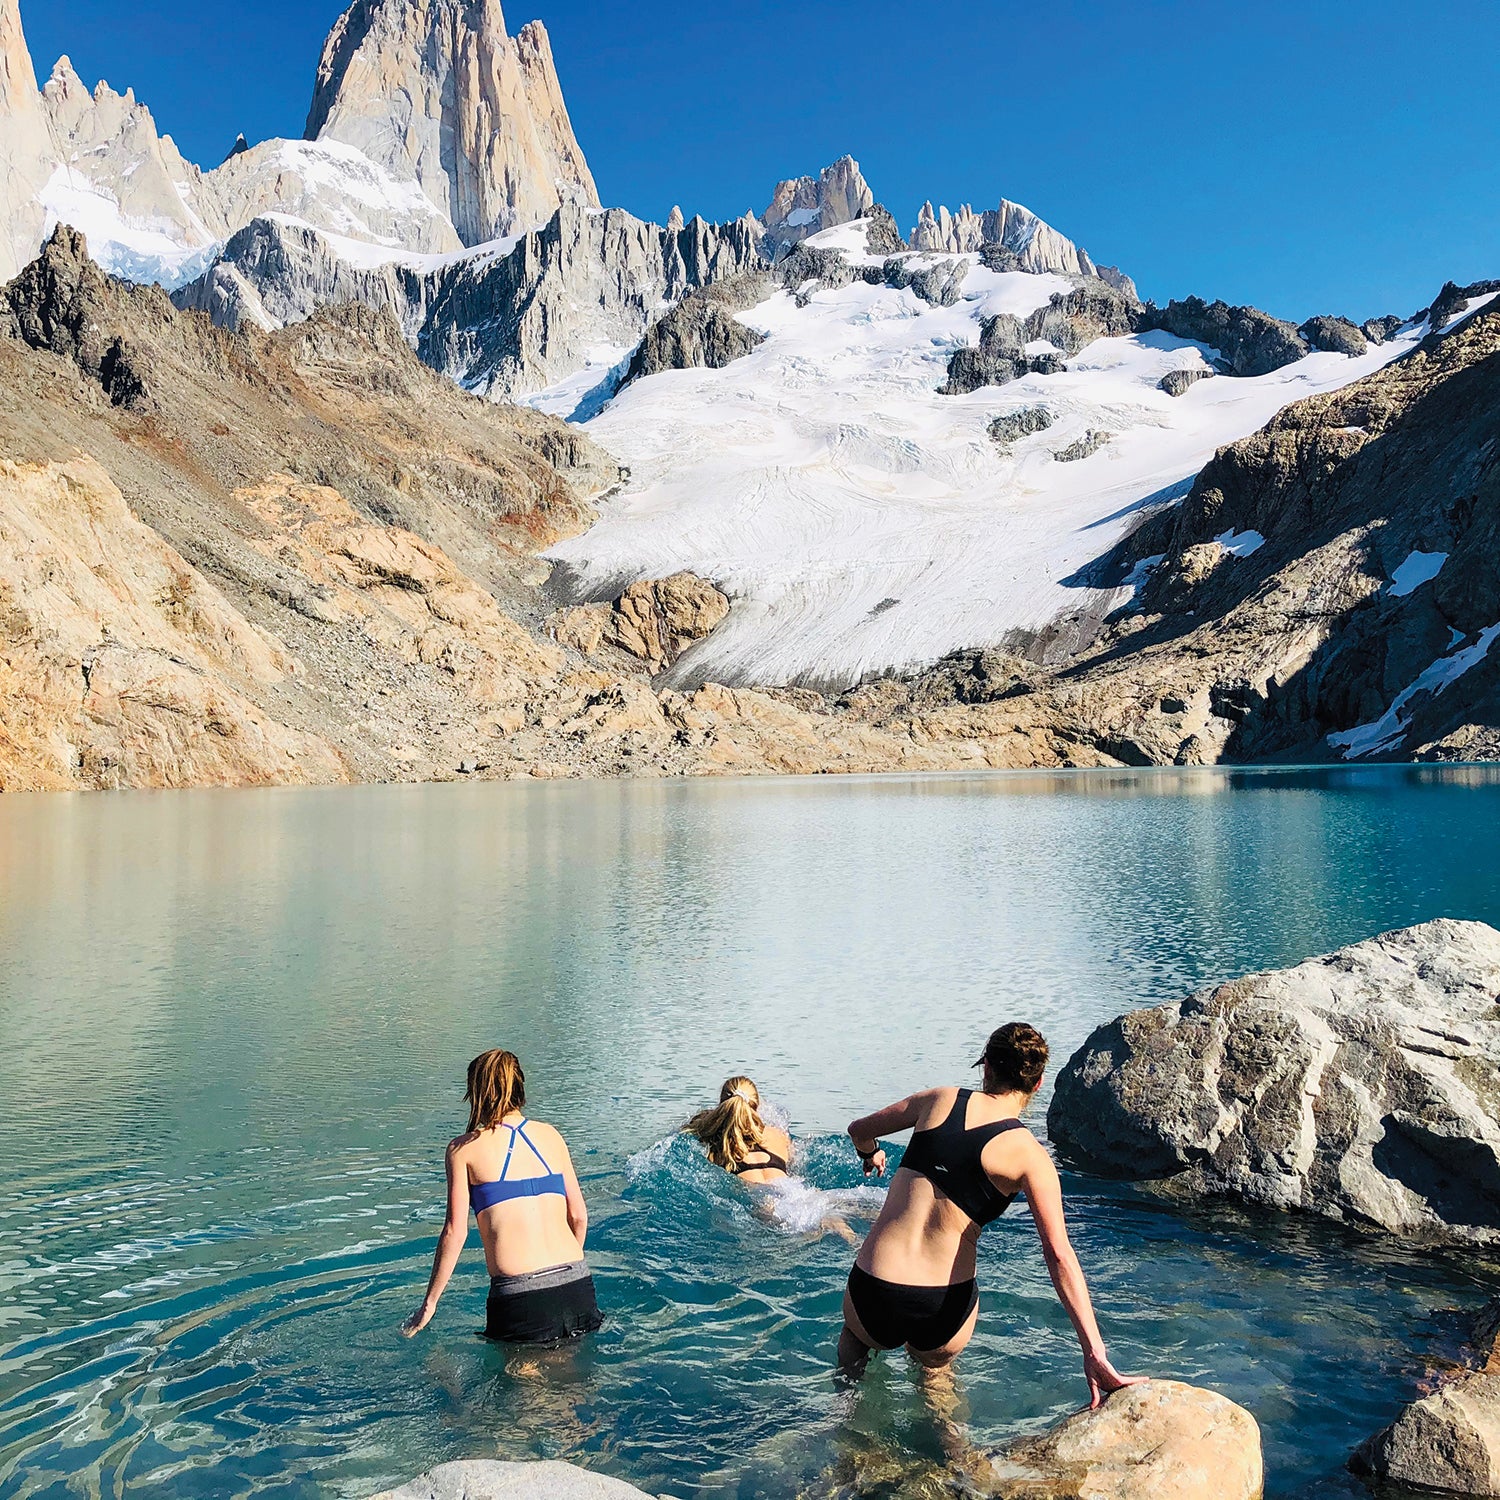 Swimming in a glacial lake in Patagonia